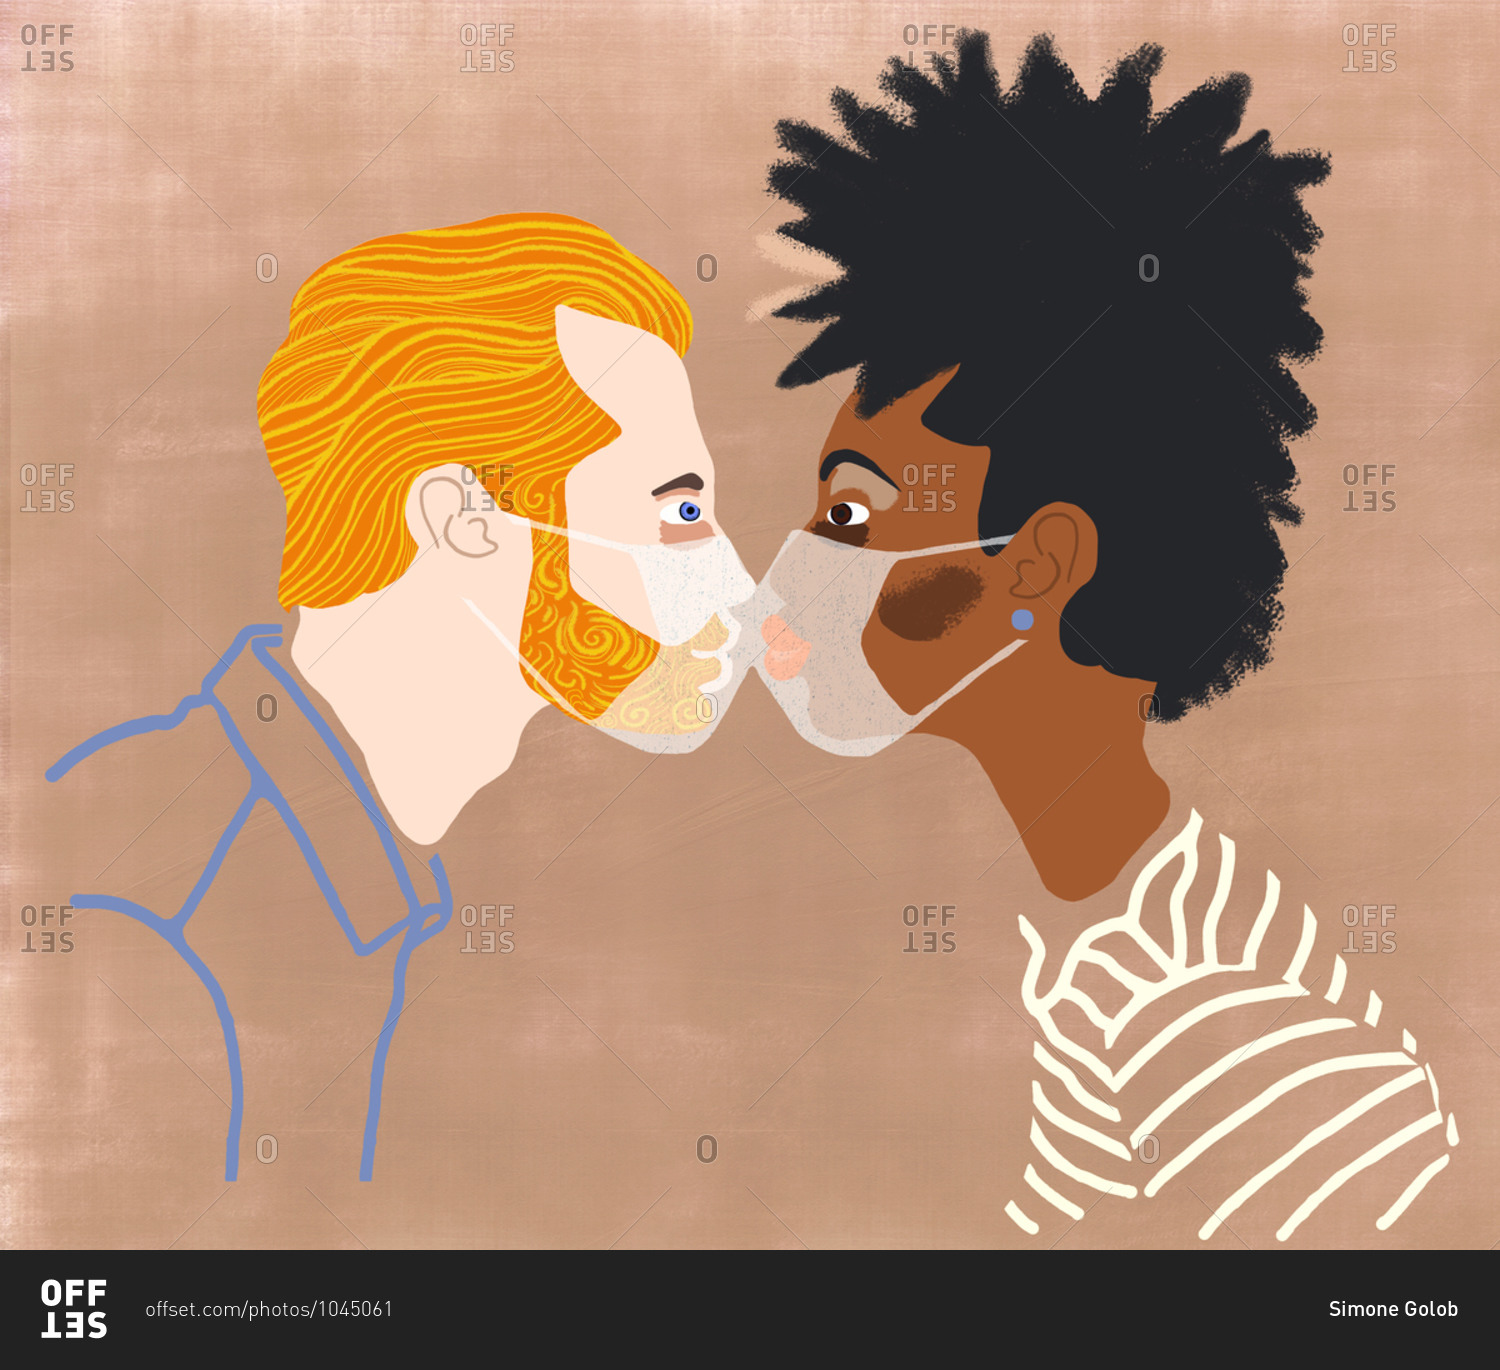 Close up profile of two people kissing though face masks